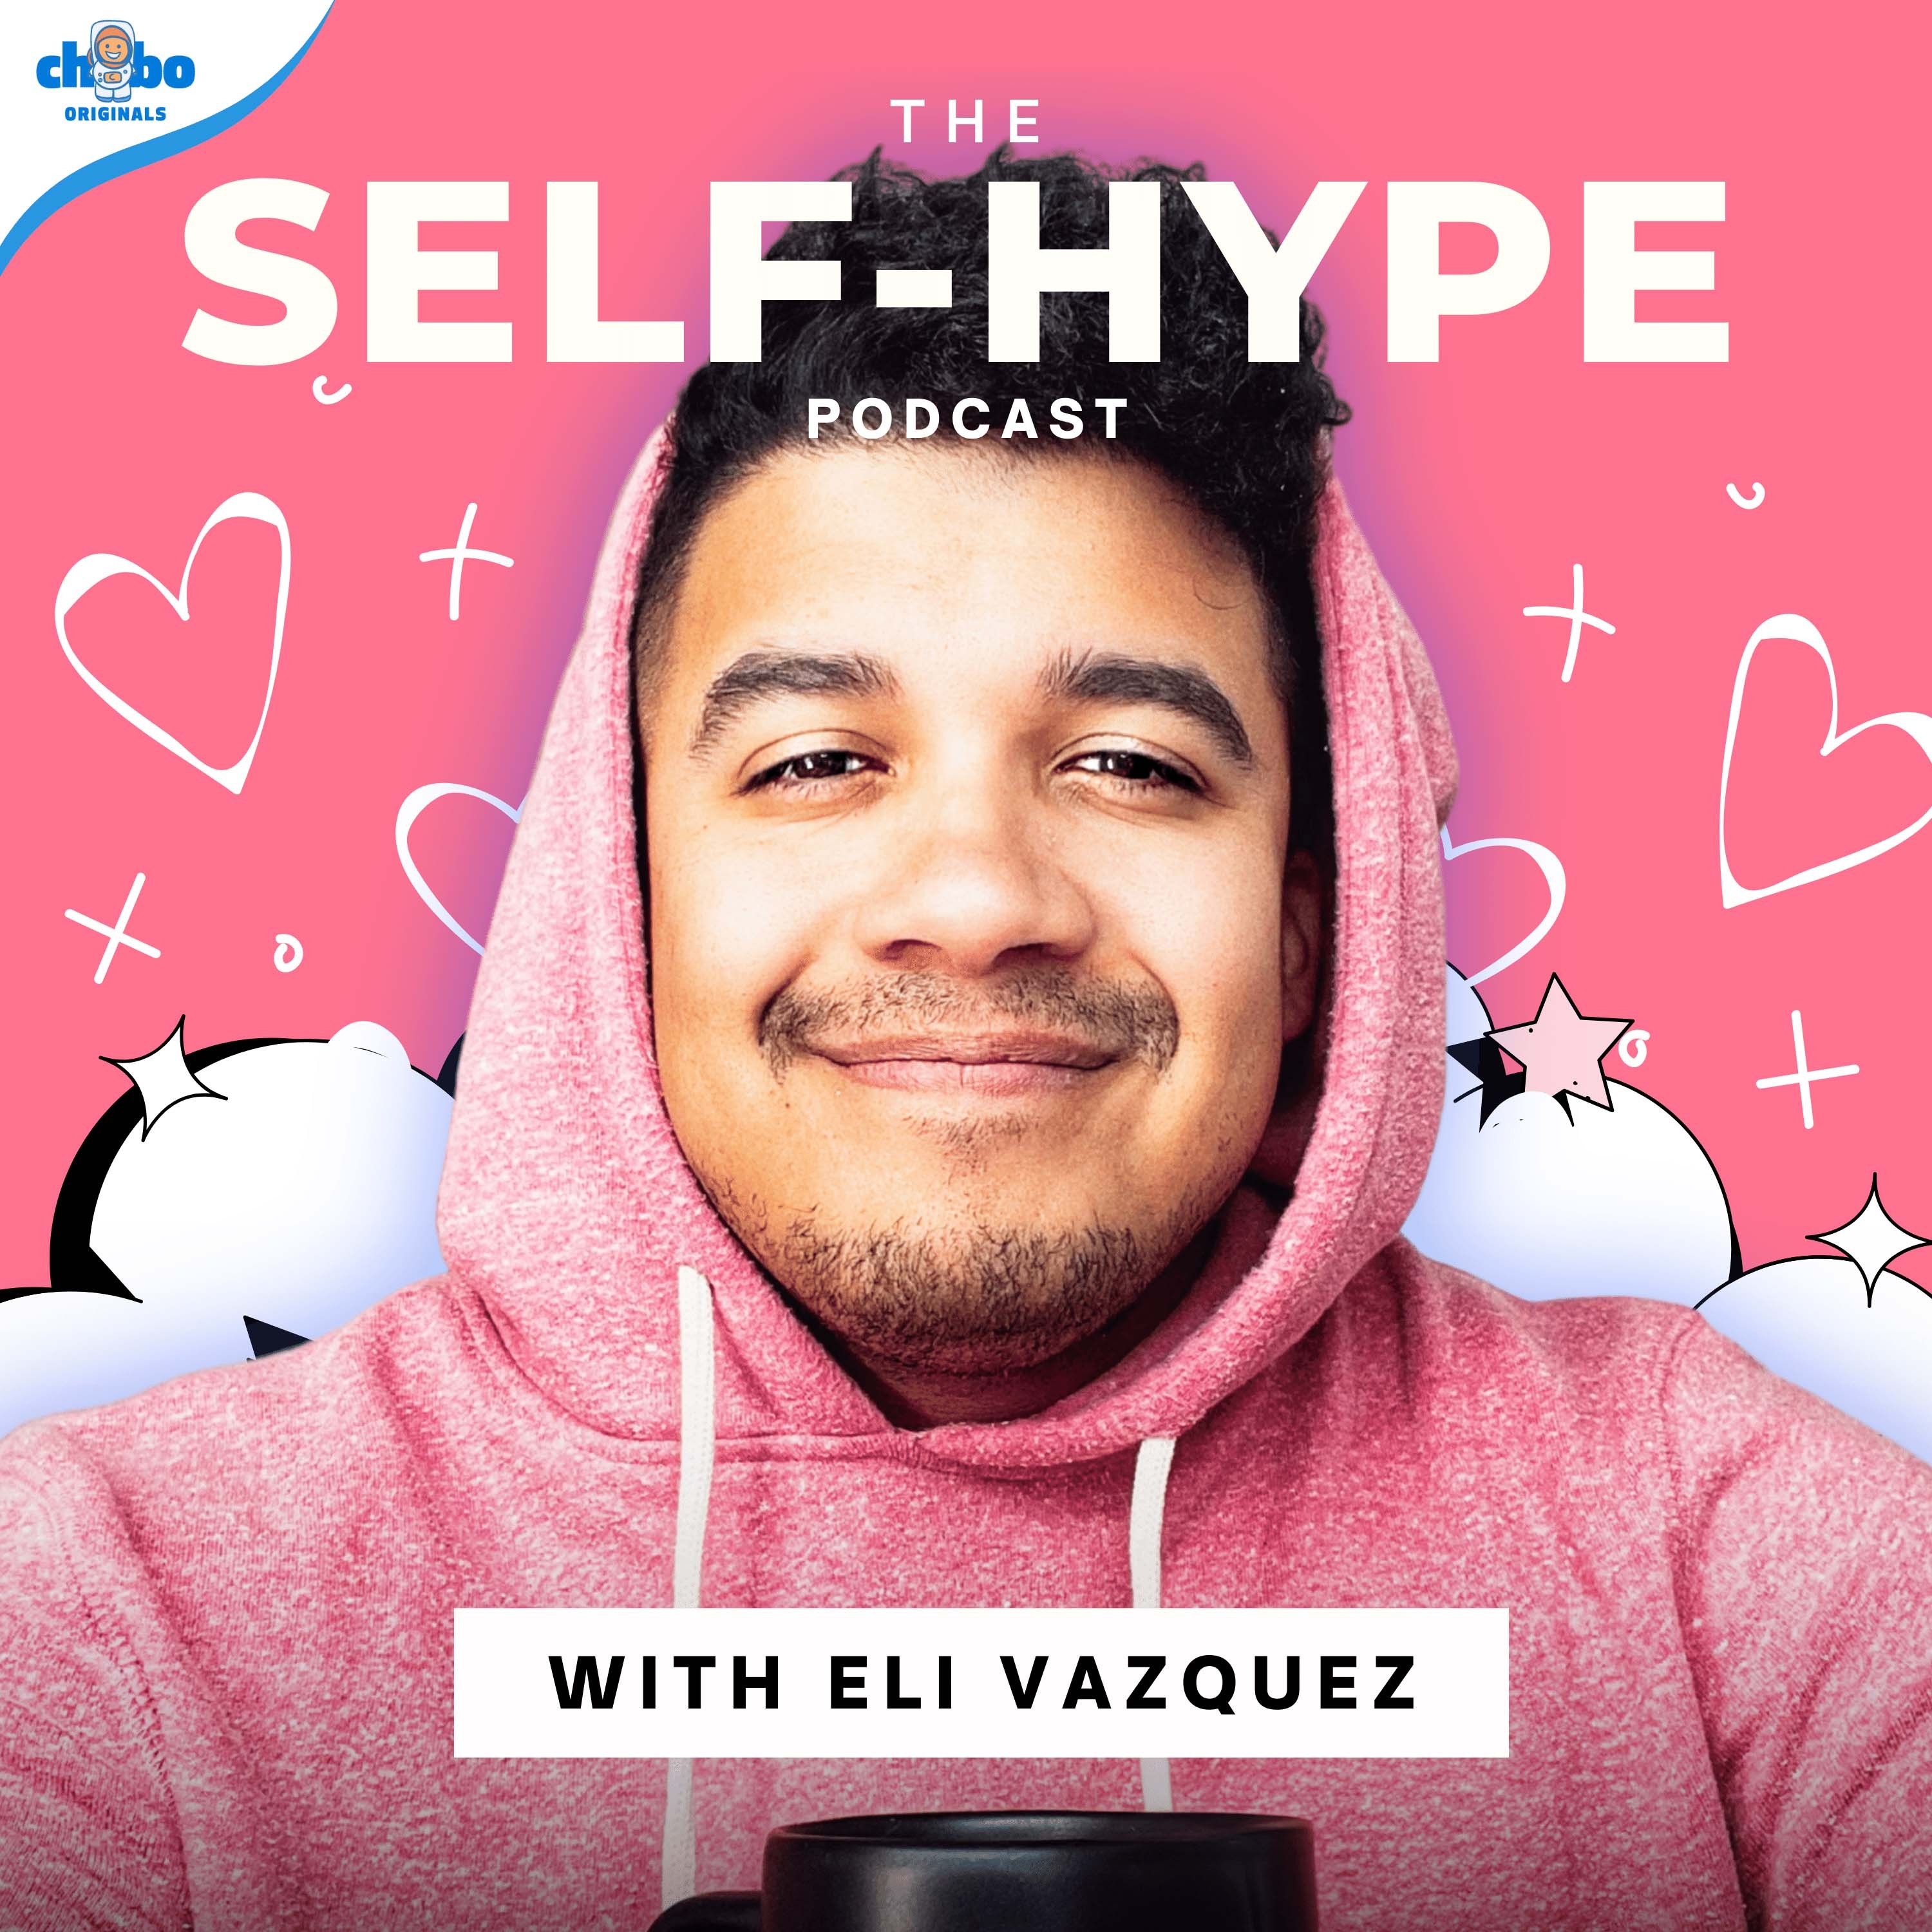 The Self-Hype Podcast